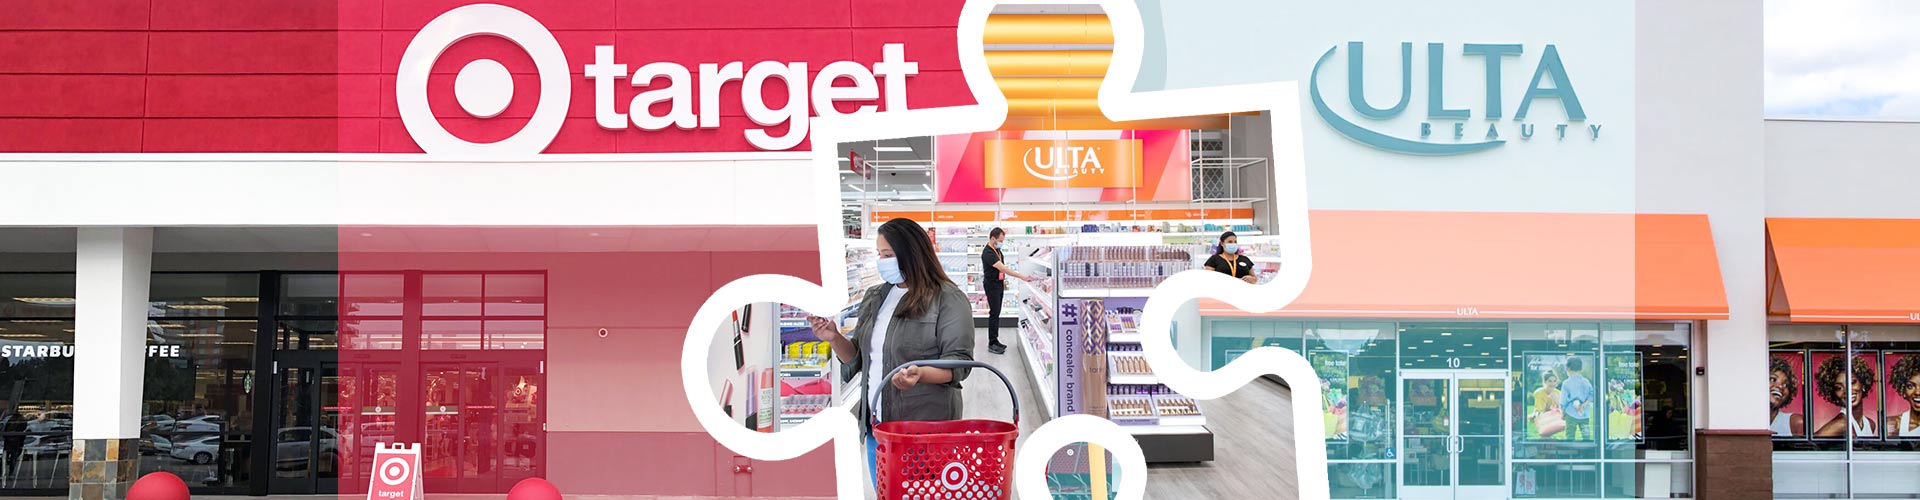 Split collage of Target and Ulta stores with center image of Ulta products at Target - banner